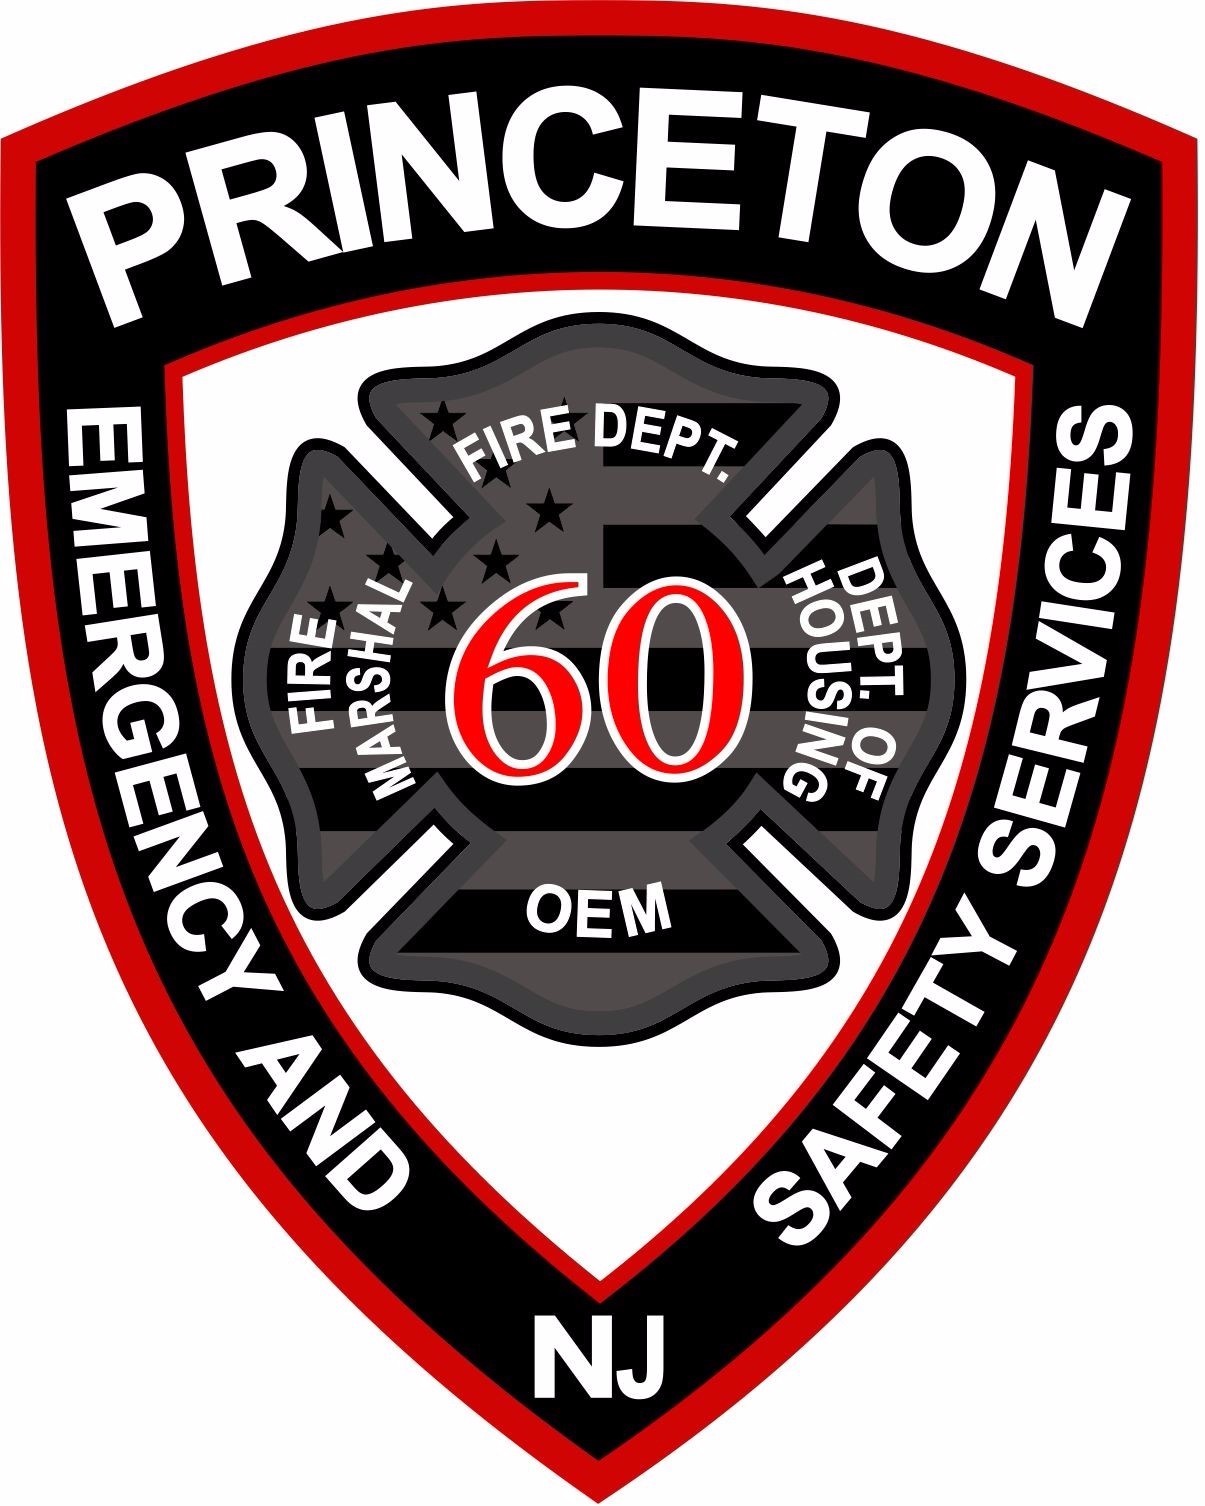 Princeton Department of Emergency & Safety Services
Bureau of Fire Safety